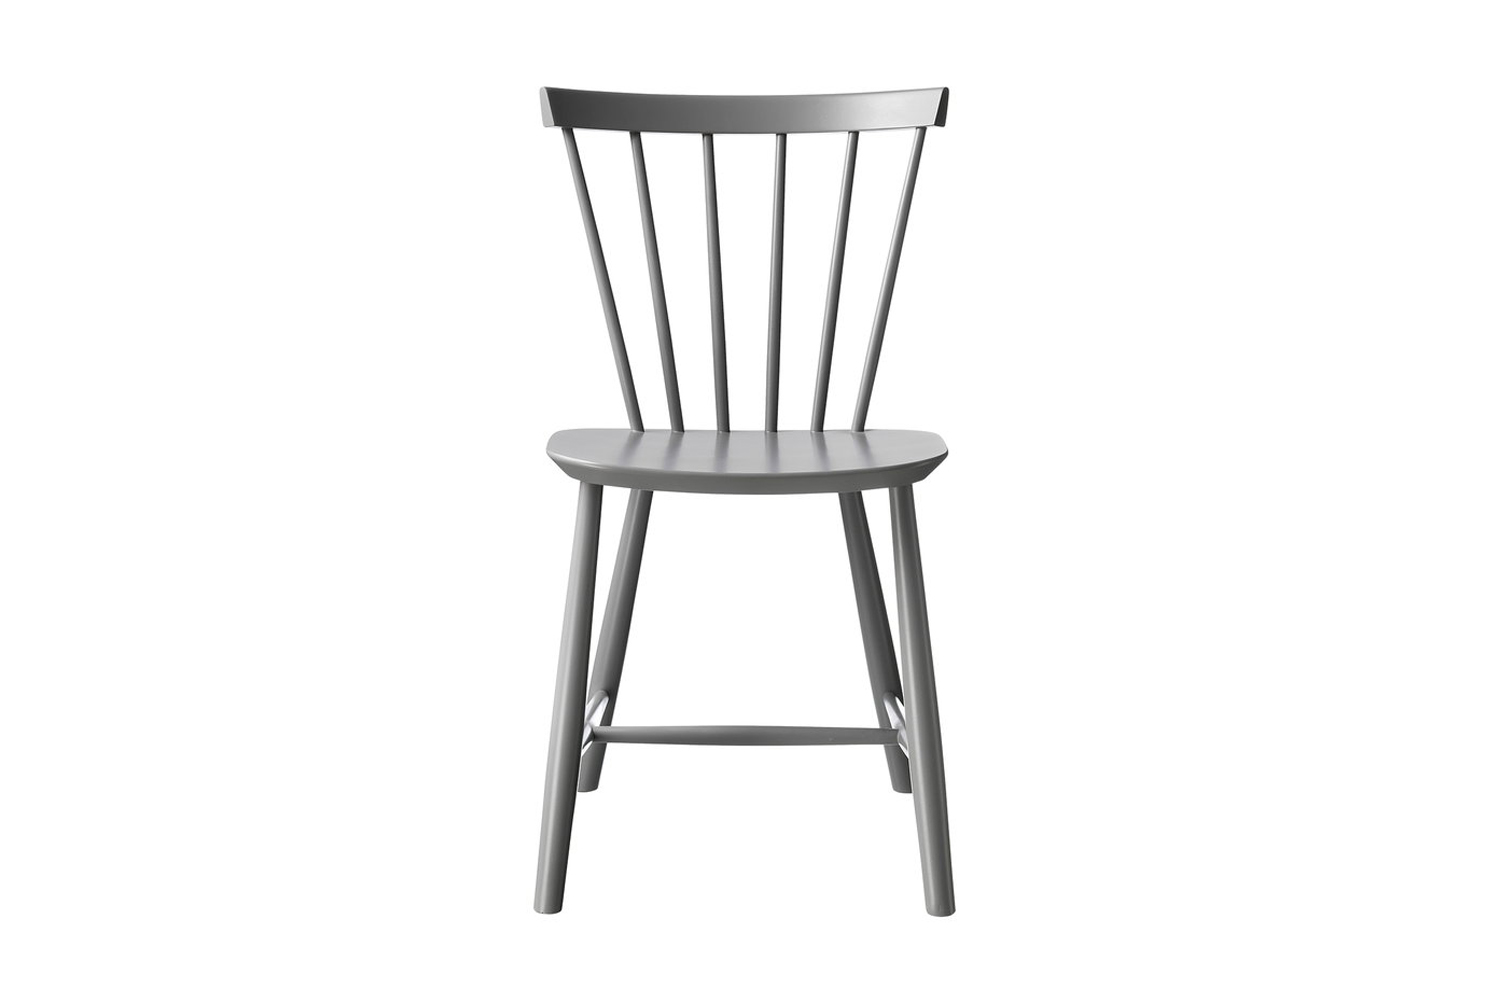 the fdb møbler j46 chair in grey is \$\2\15 at finnish design shop. 16